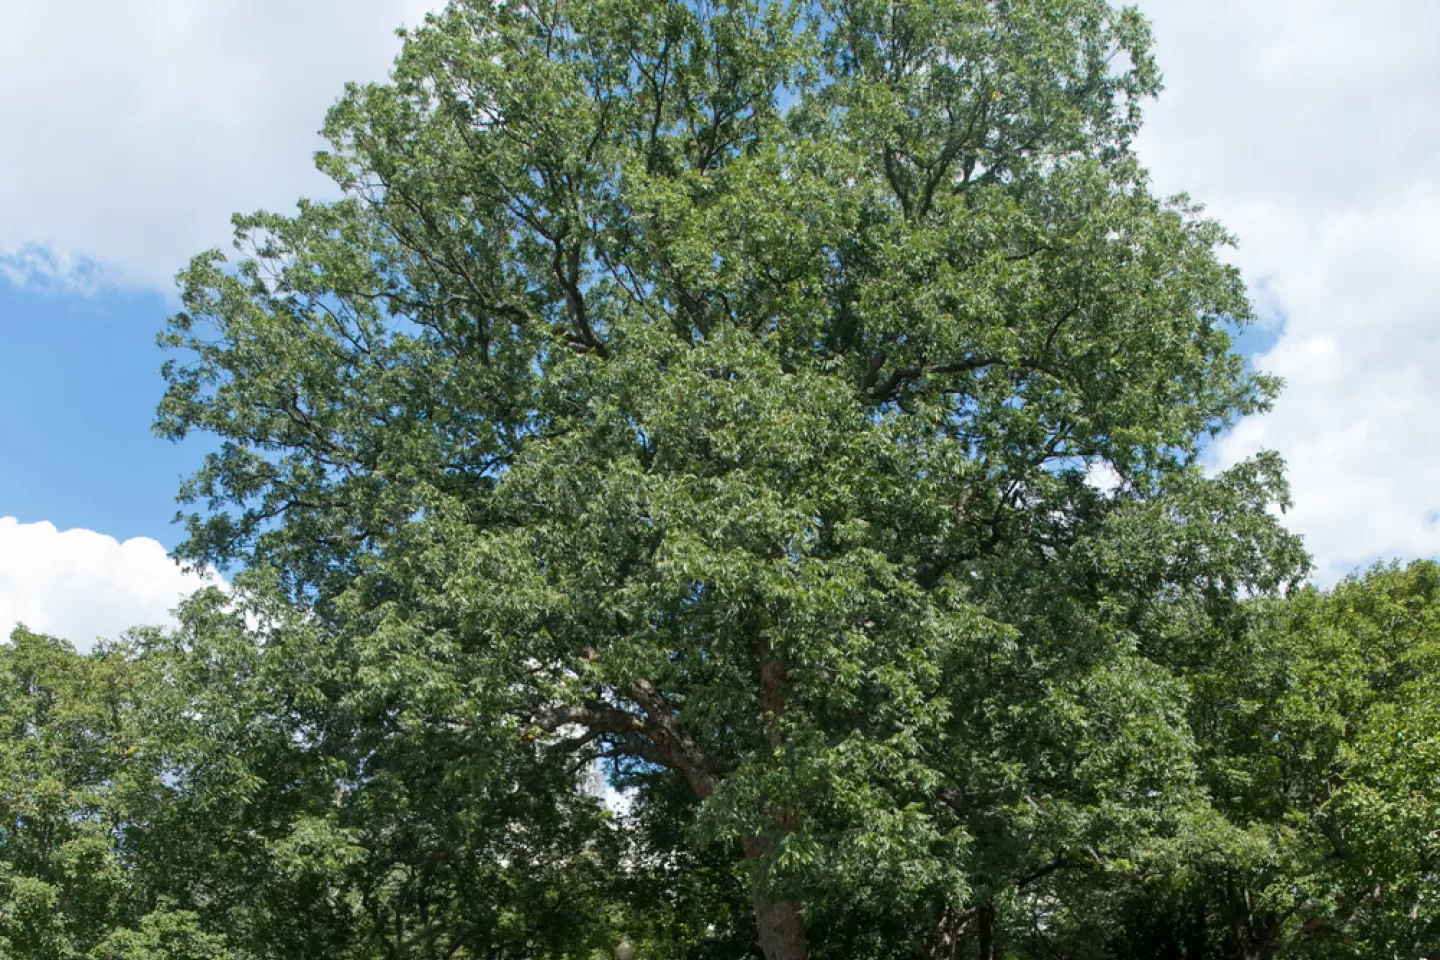 The Rep. Slayden tree on the U.S. Capitol Grounds during summer.